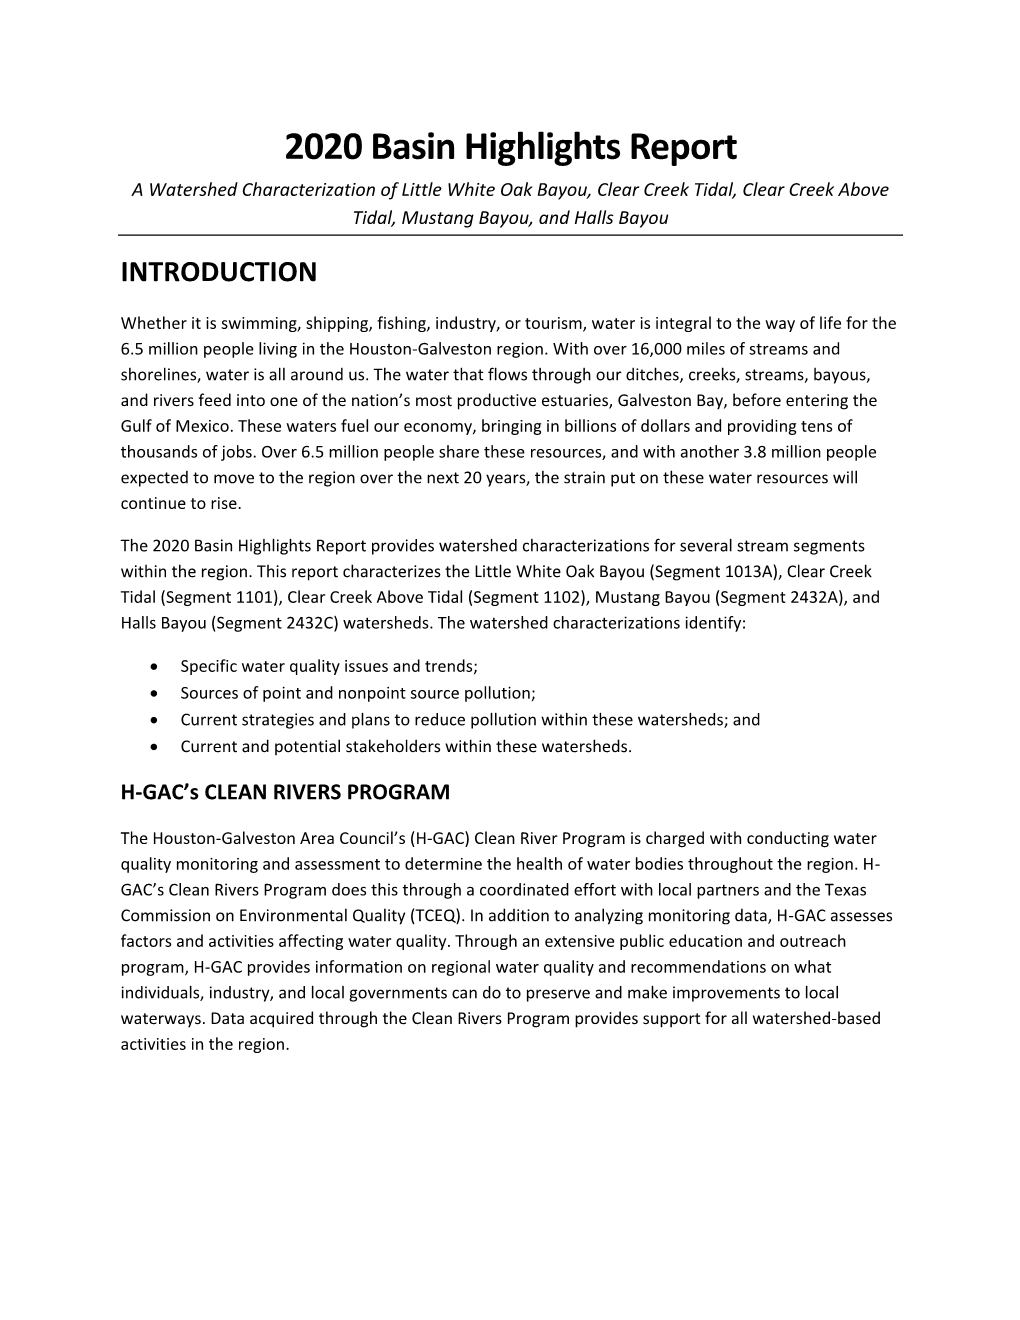 2020 Basin Highlights Report a Watershed Characterization of Little White Oak Bayou, Clear Creek Tidal, Clear Creek Above Tidal, Mustang Bayou, and Halls Bayou